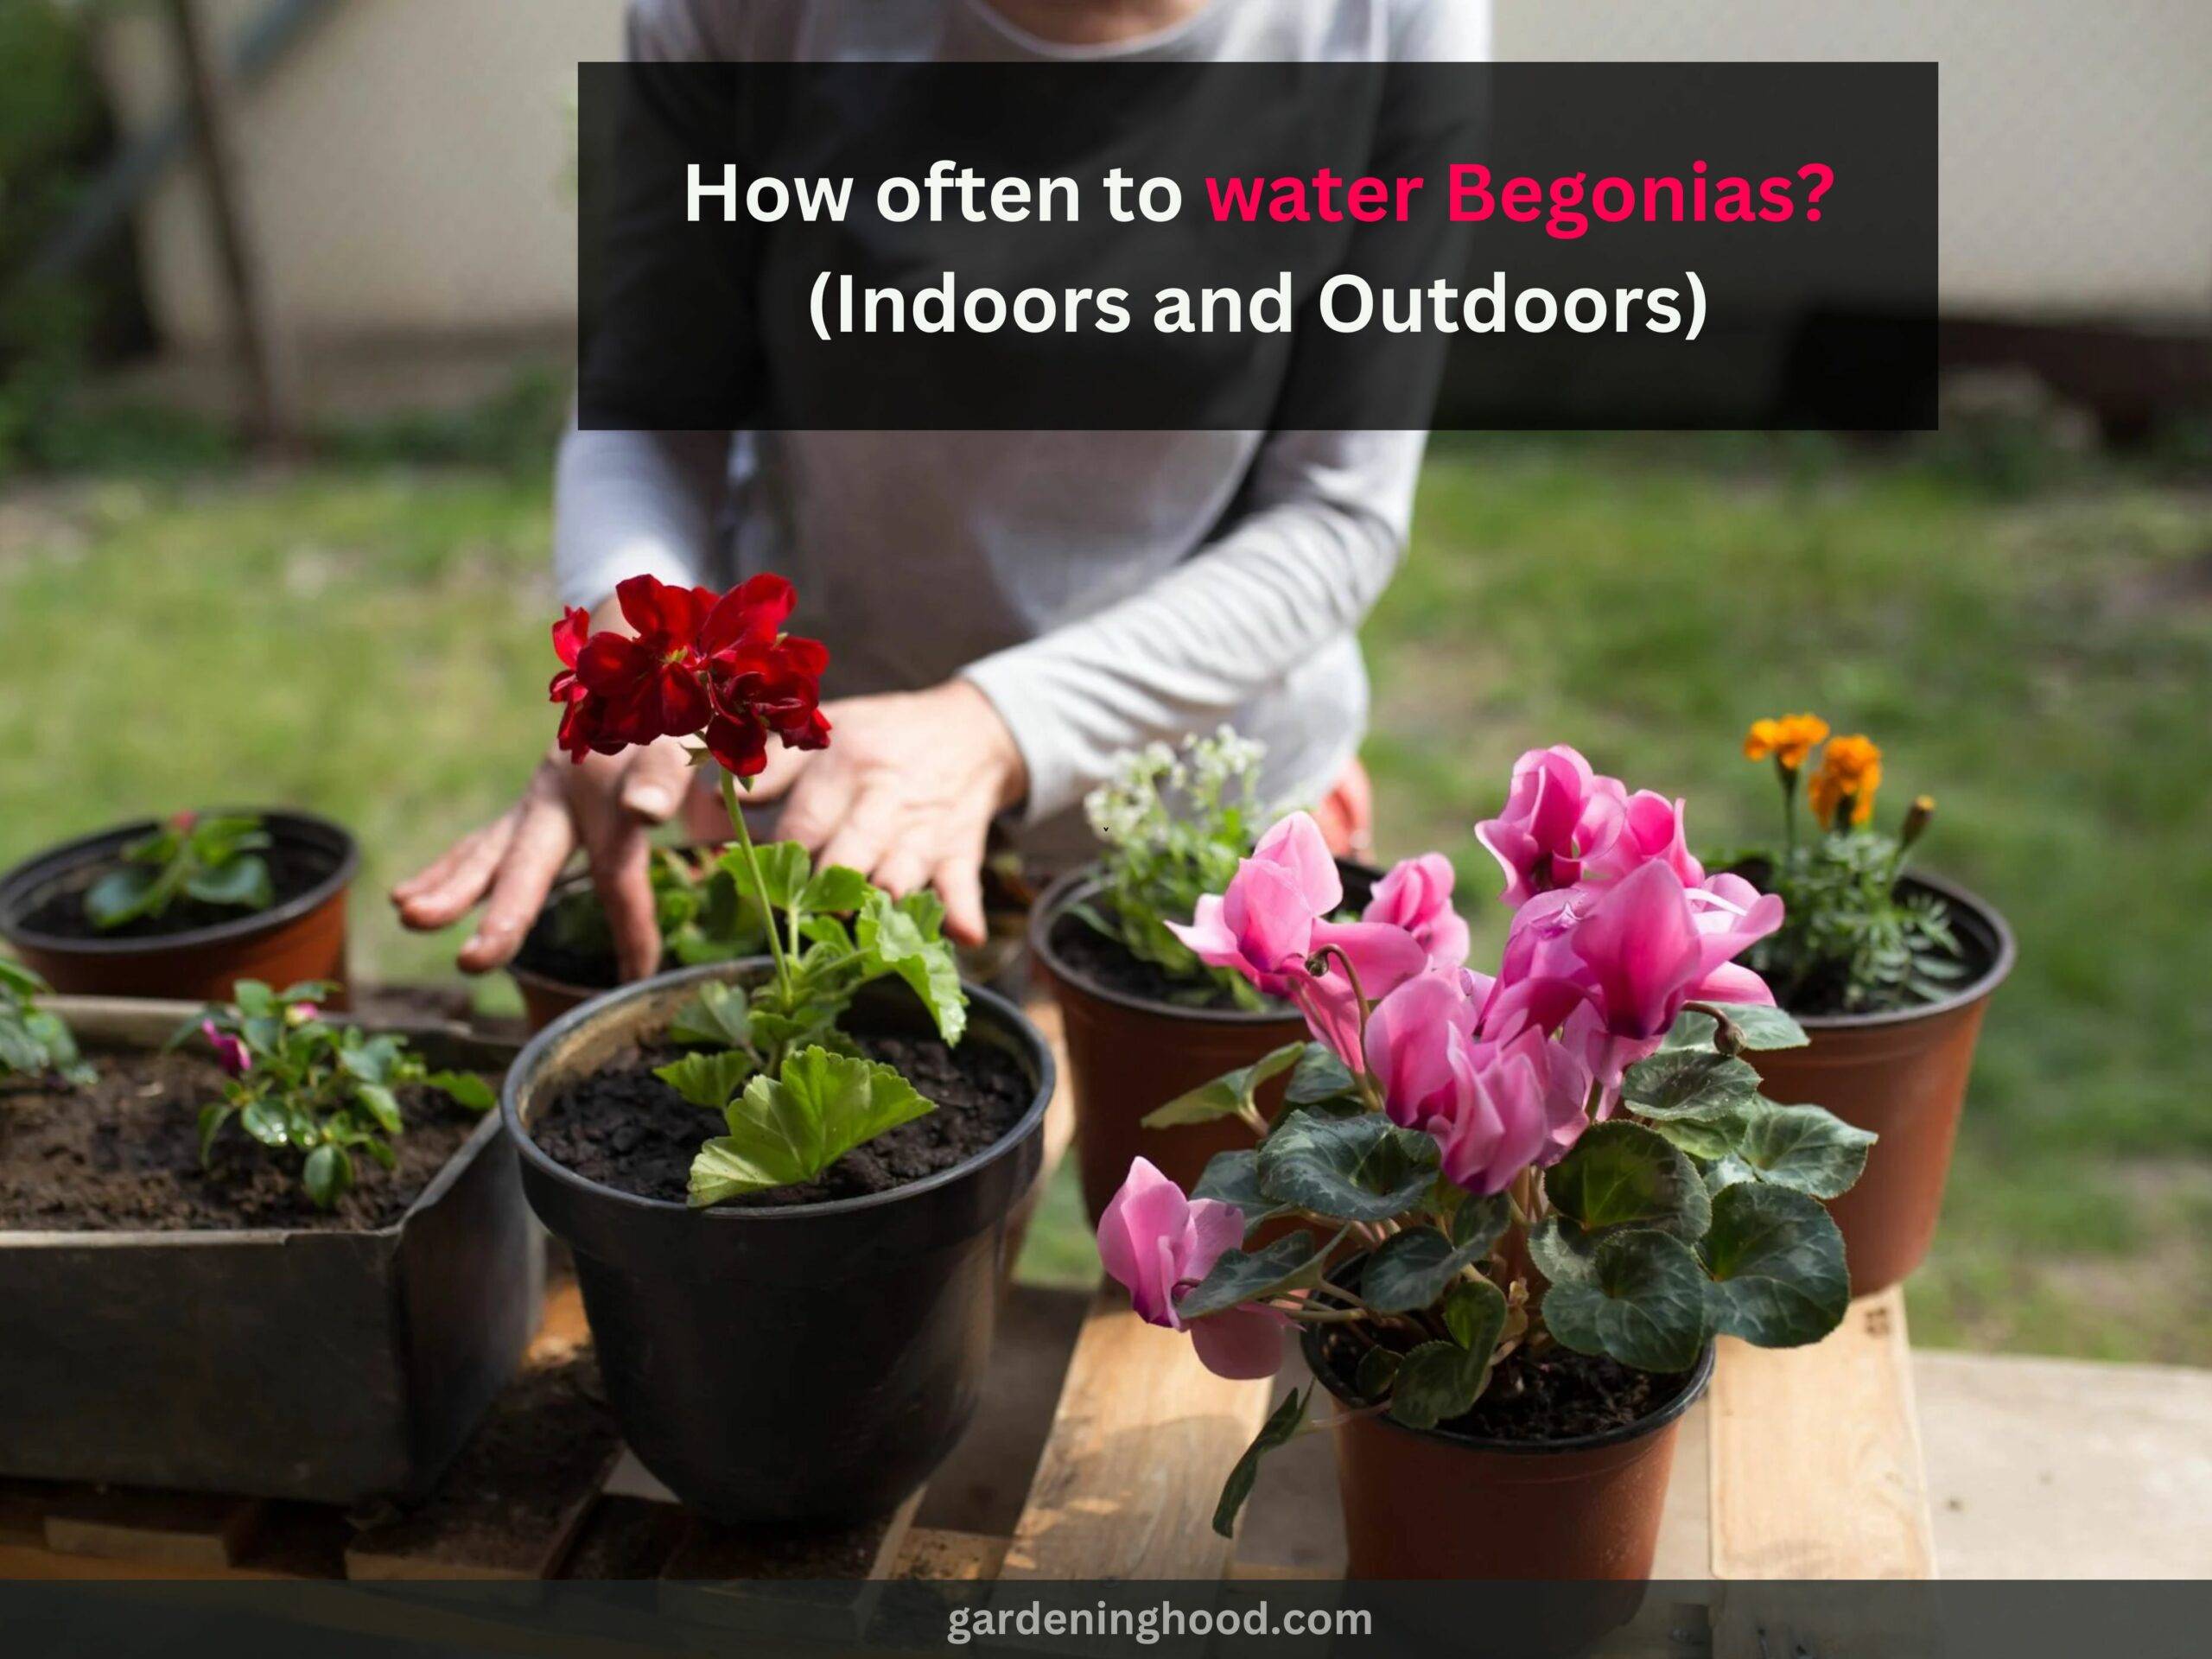 How often to water Begonias? (Indoors and Outdoors)